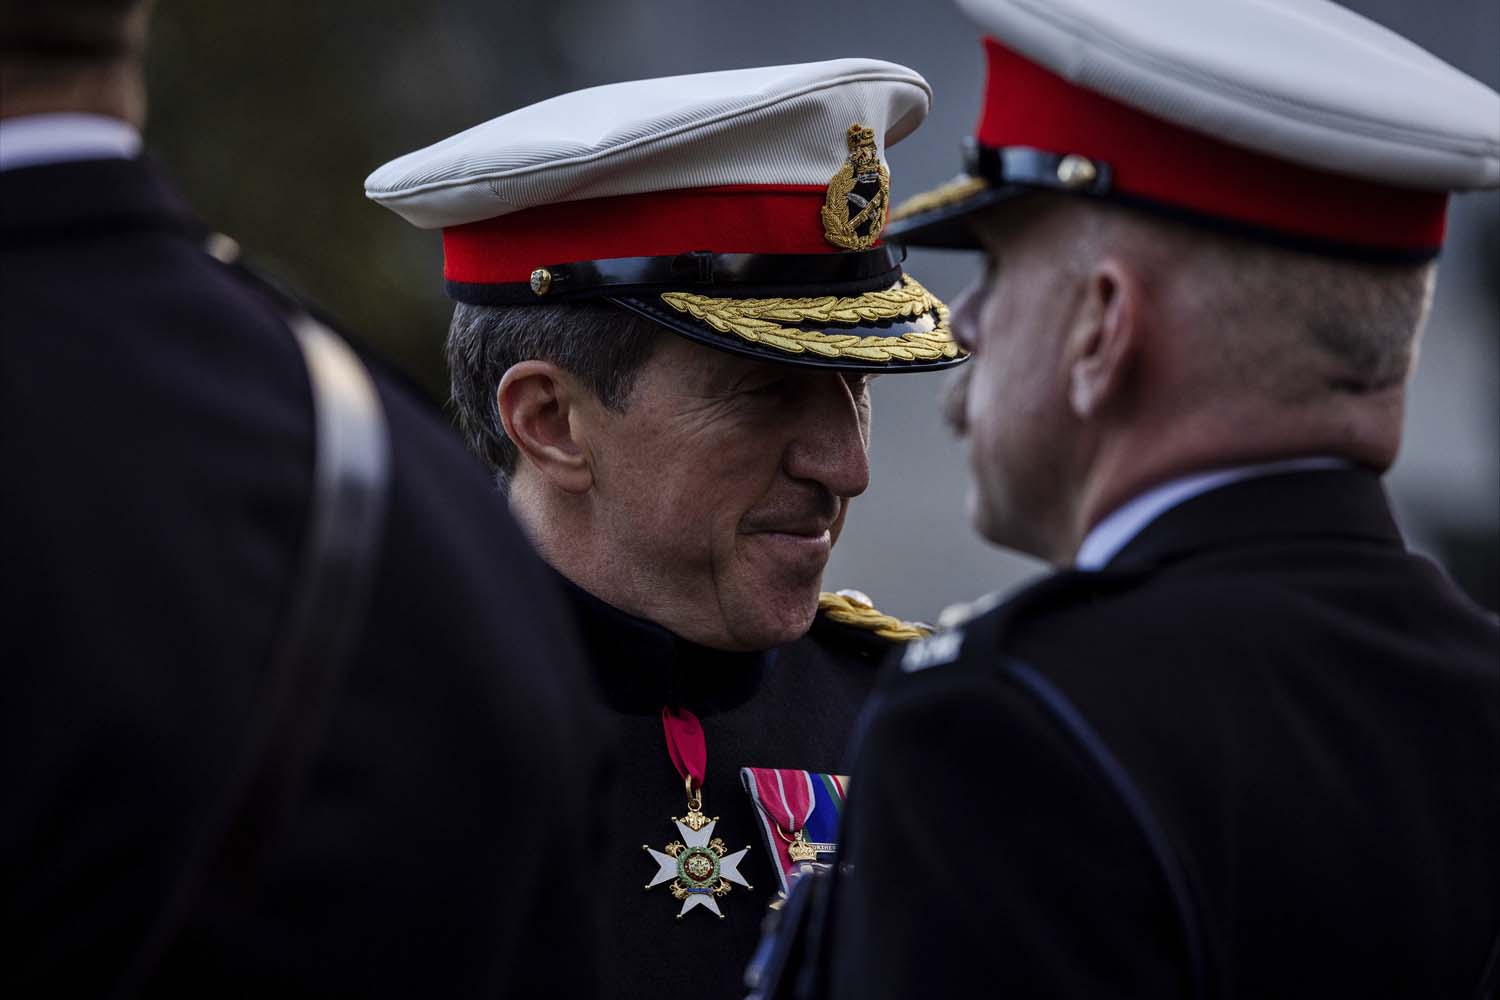 New head of the Royal Marines appointed